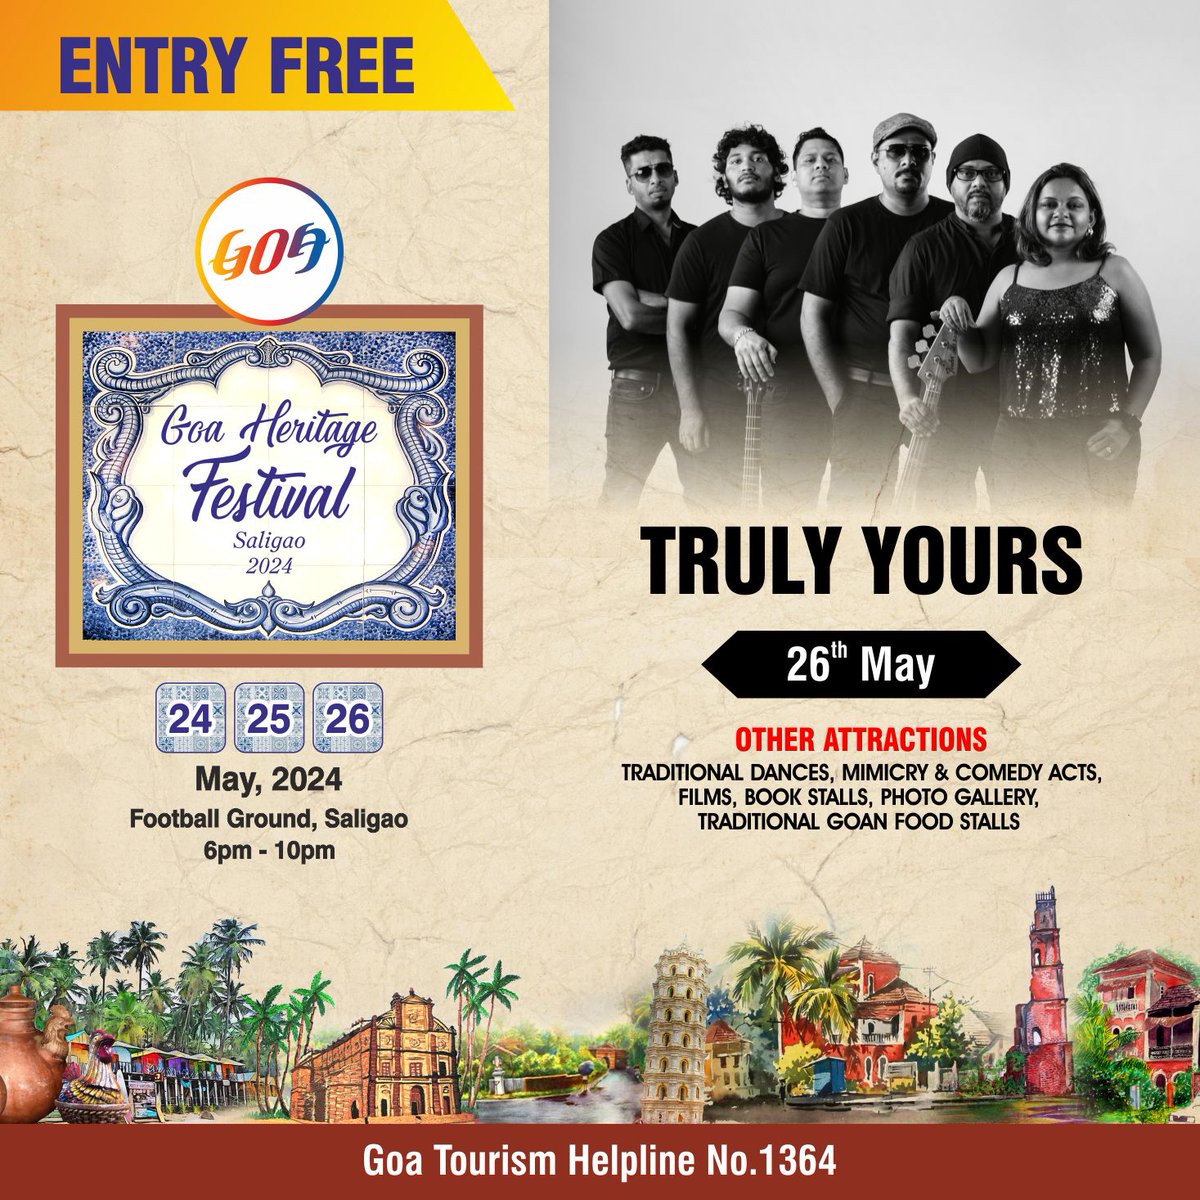 Prepare to move and groove with Truly Yours Goa at the #GoaHeritageFestival! Their lively tunes will keep you dancing all night long. Don't miss out on the excitement! #GoaTourism #RegenerativeTourismGoa @SuneelAnchipaka @sanjeevahuja007 @RohanKhaunte